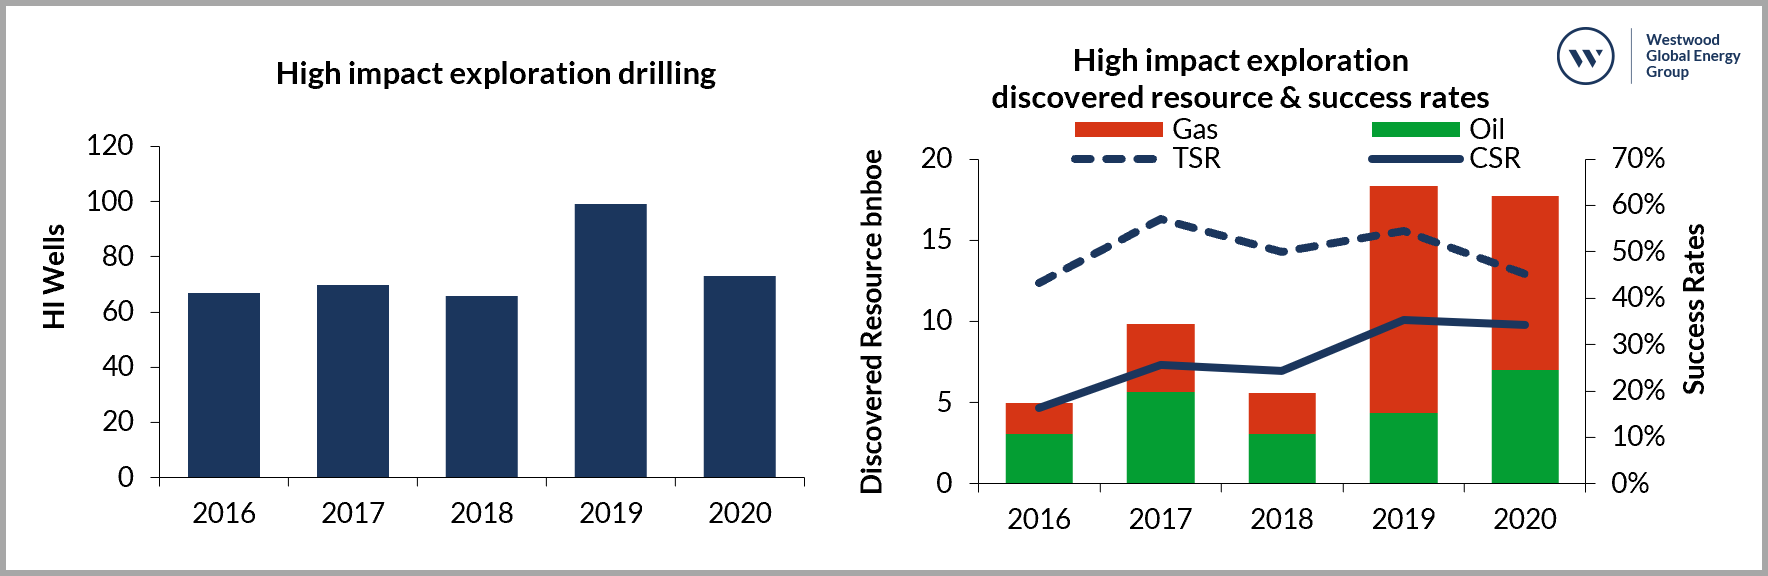 3 High impact exploration drilling discovered resources and success rates 2016 2020